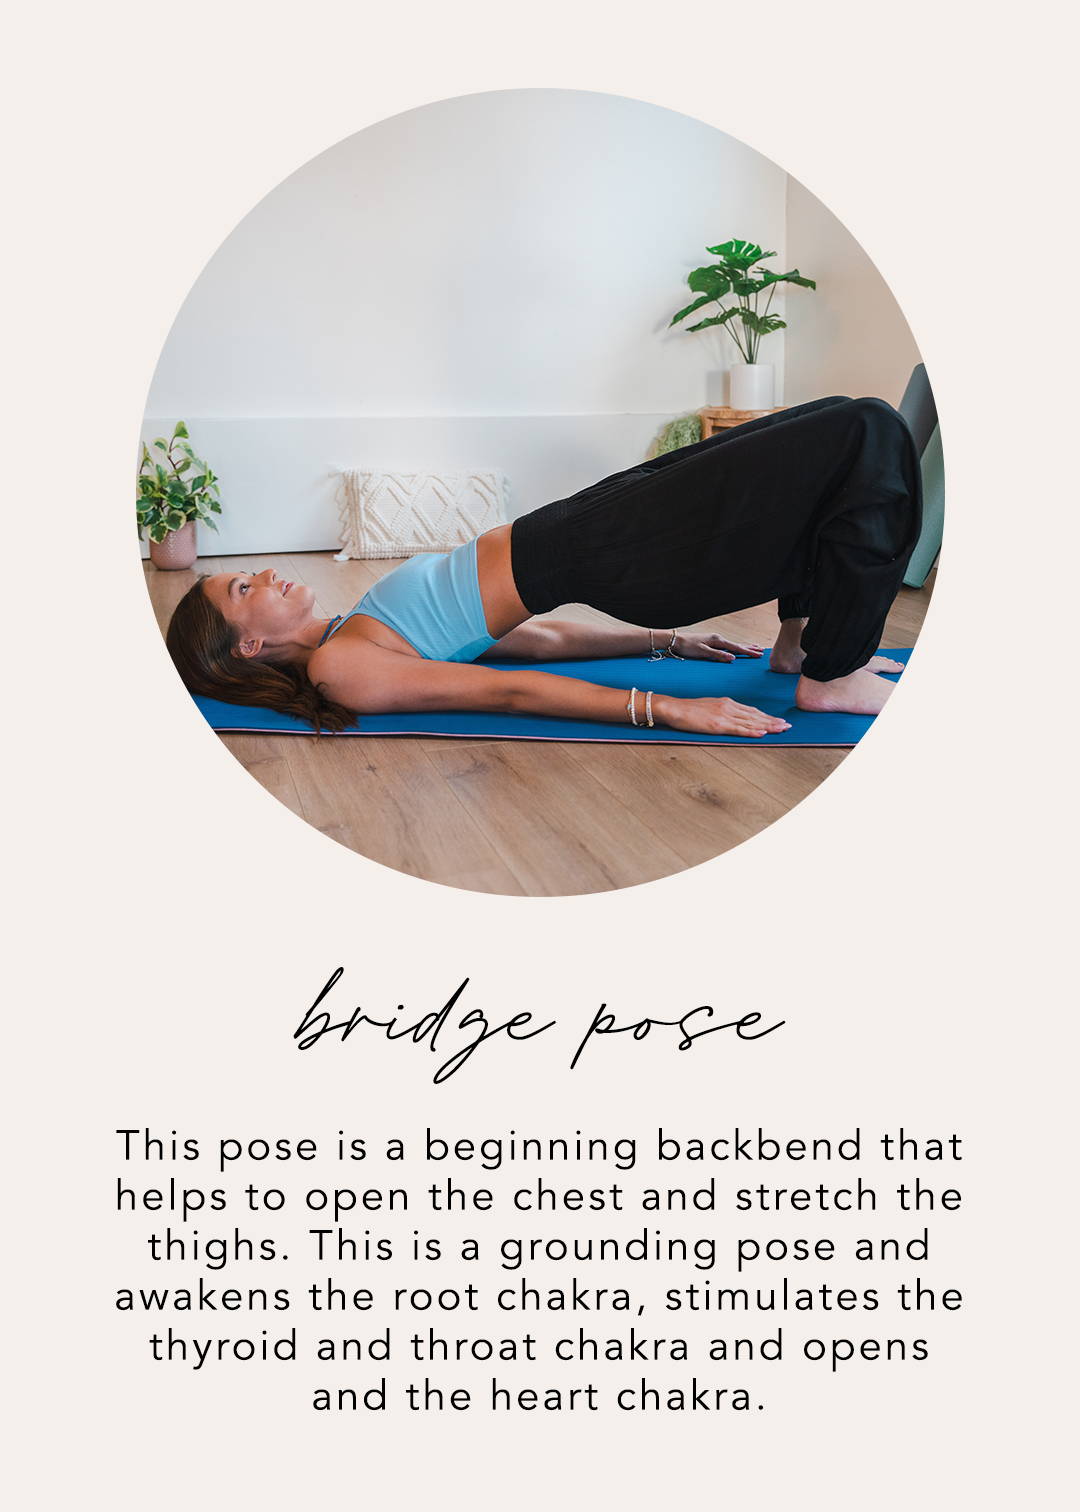 Bridge Pose: This pose is a beginning backbend that helps to open the chest and stretch the thighs. This is a grounding pose and awakens the root chakra, stimulates the thyroid and throat chakra, and opens the heart chakra.